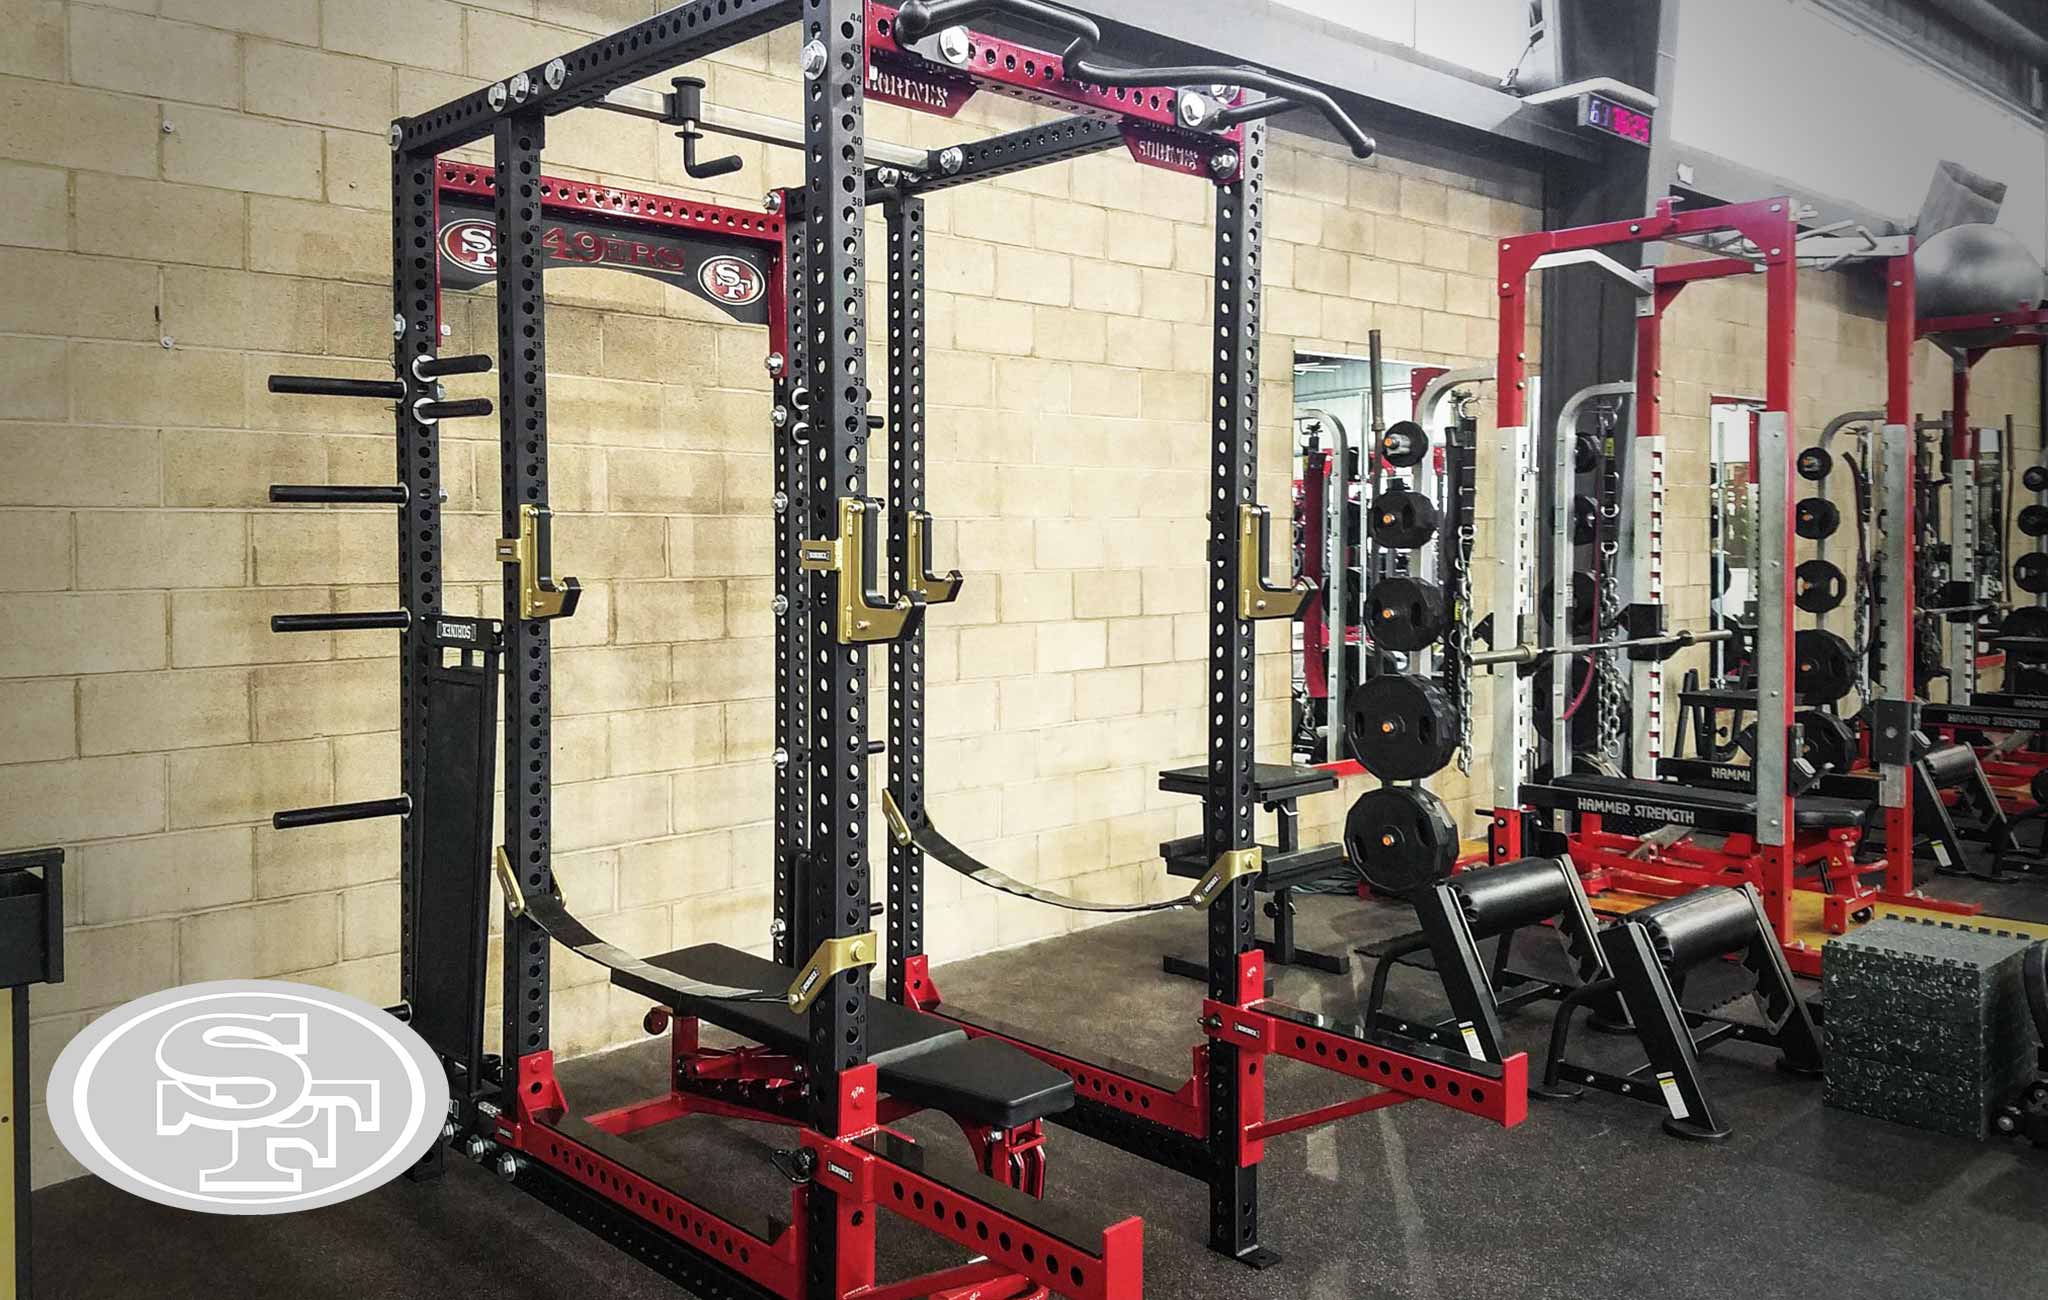 San Fransisco Sorinex strength and conditioning facility